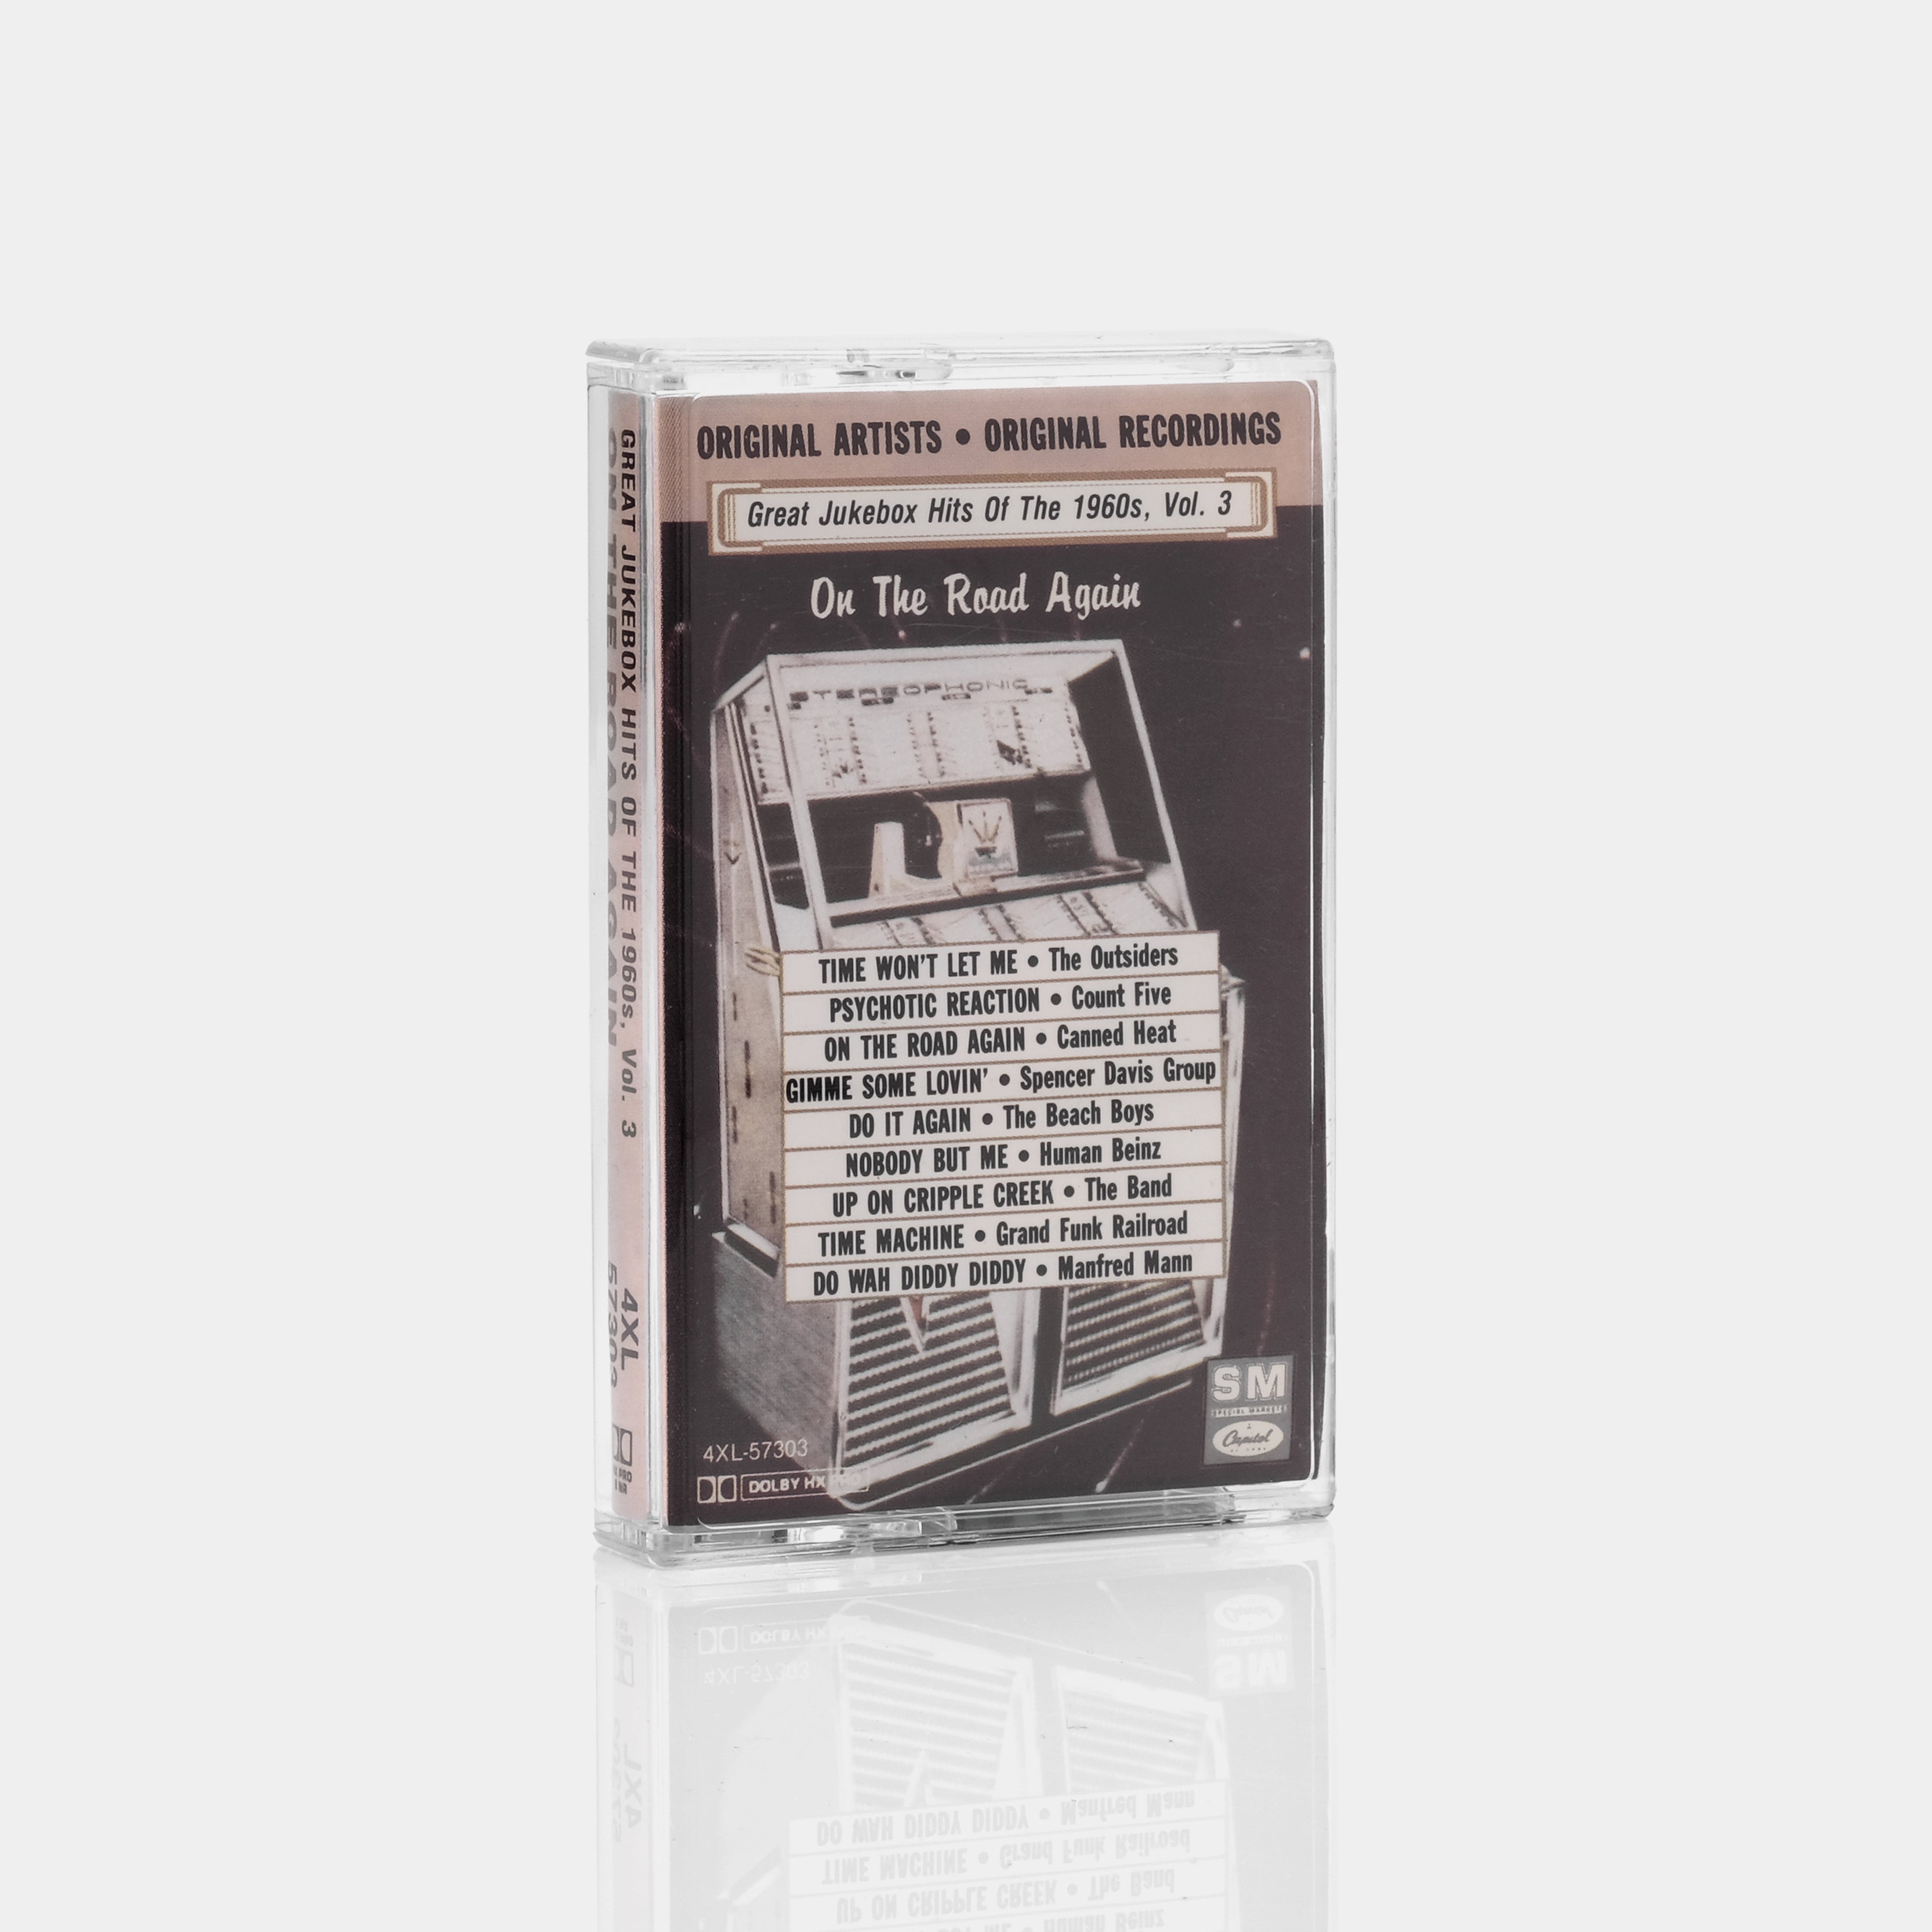 On The Road Again Great Jukebox Hits Of The 1960s (Vol. 3) Cassette Tape